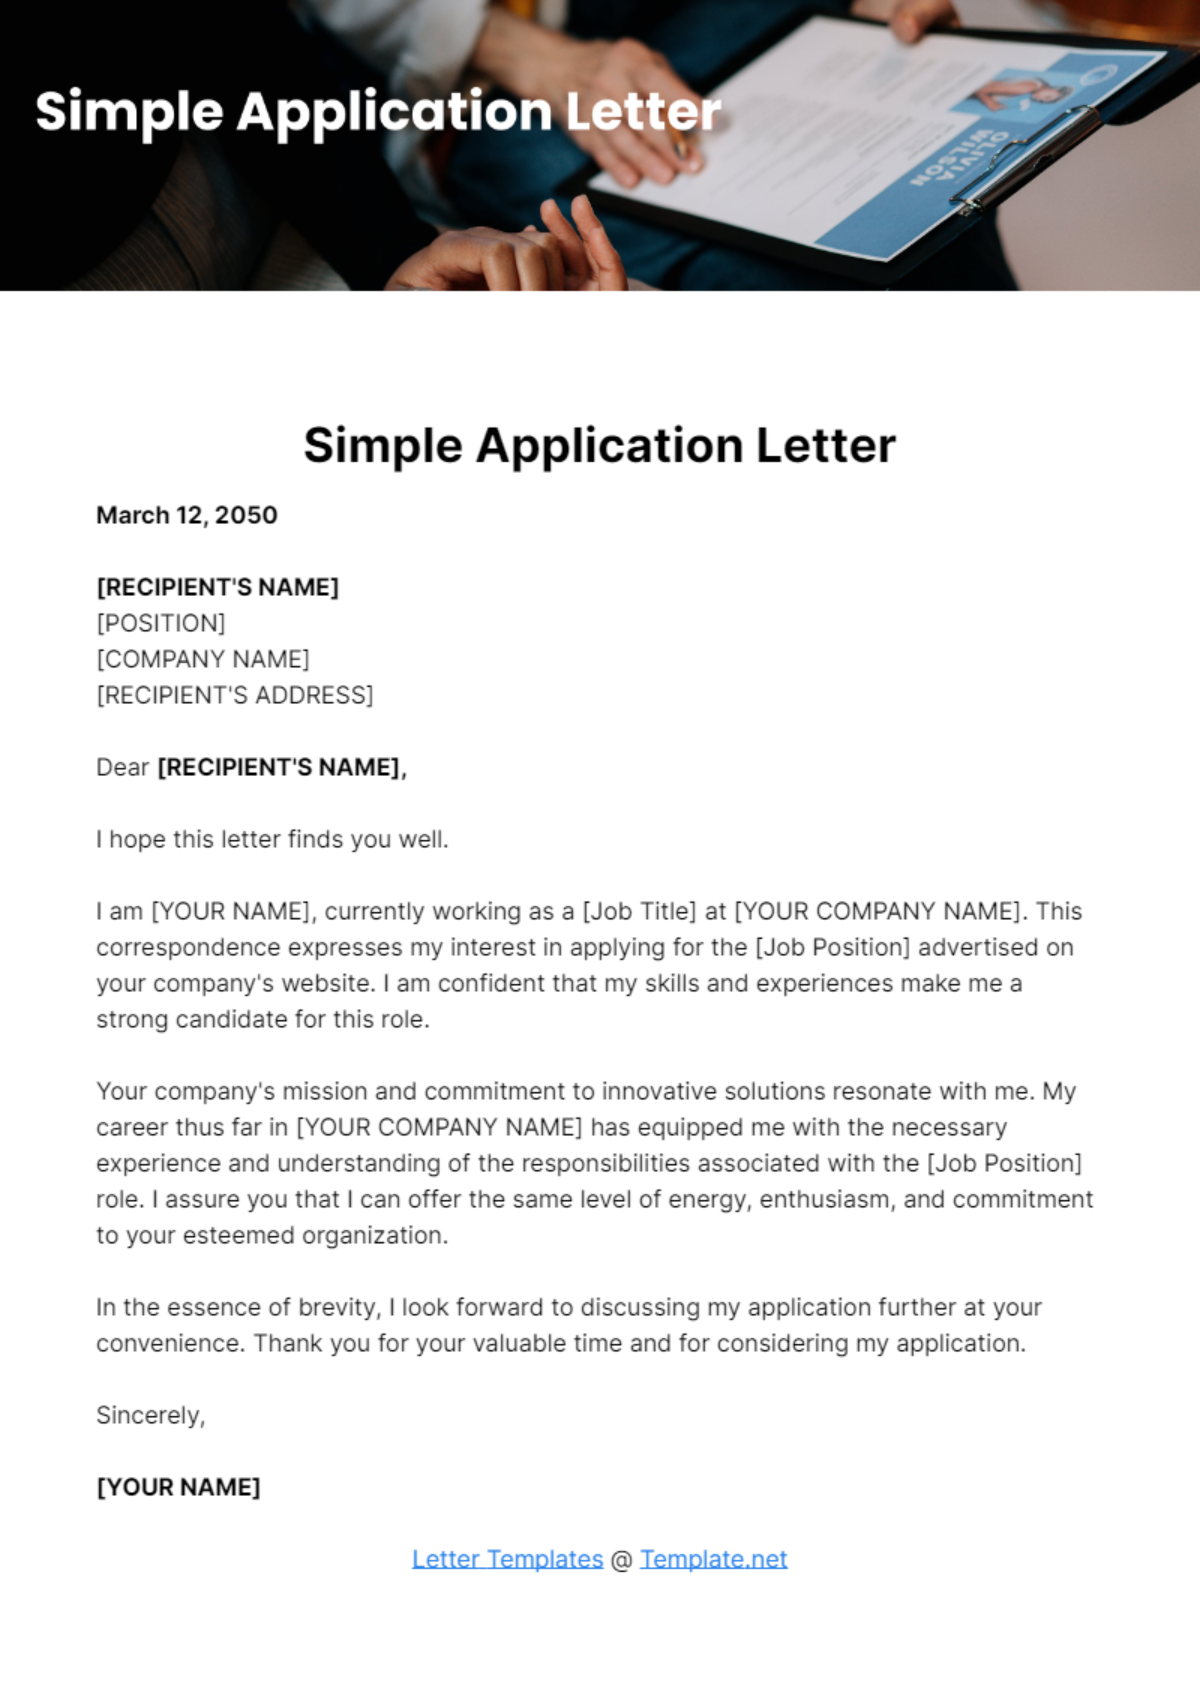 Free Simple Application Letter Template